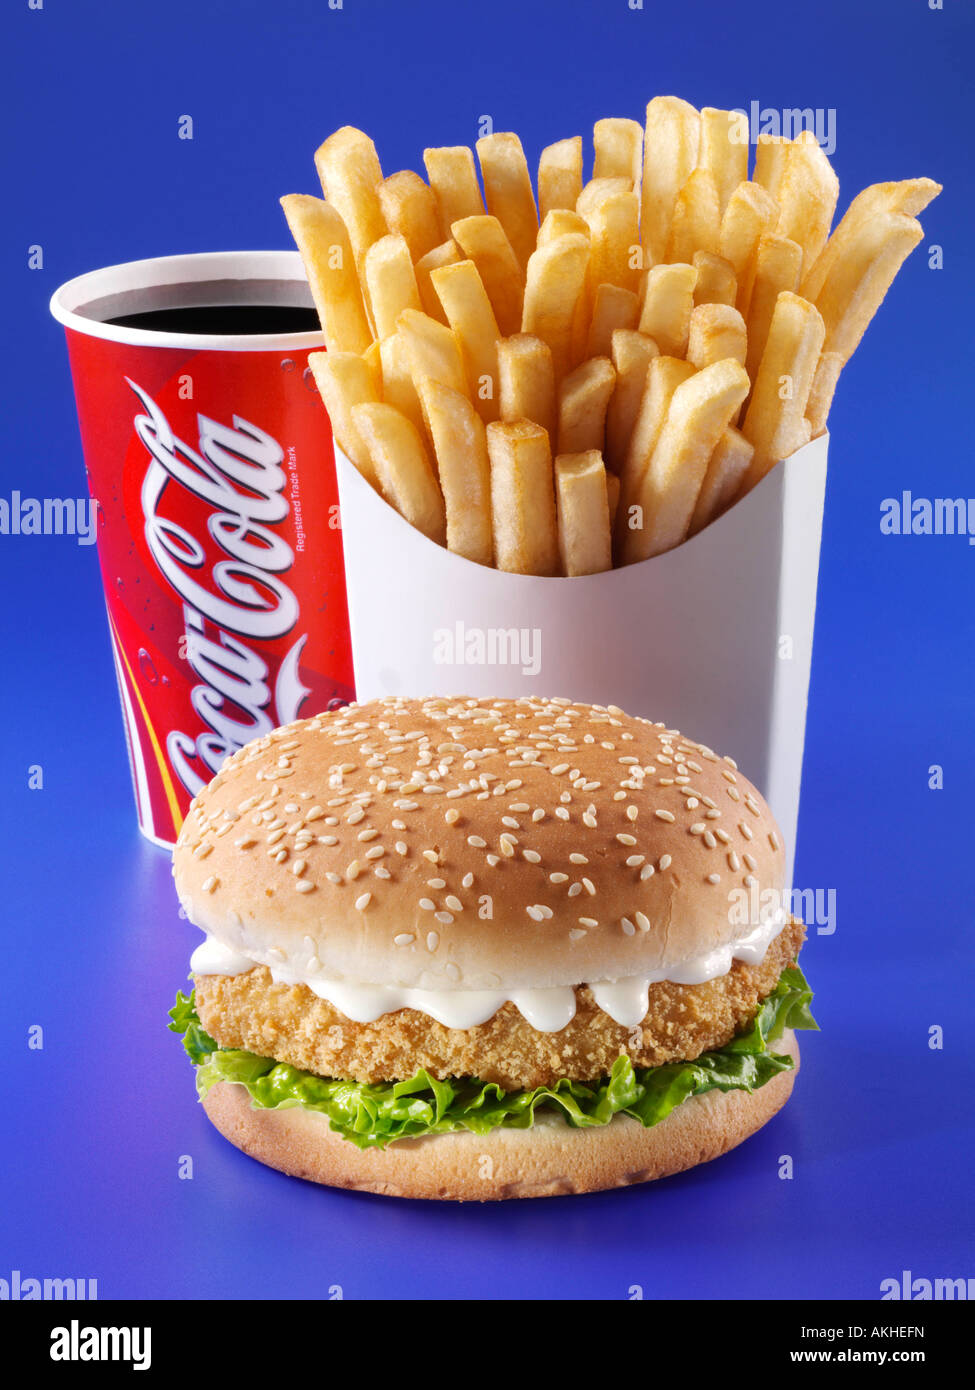 Chicken Burger French Fries Coke Editorial Junk Food Stock Photo Alamy